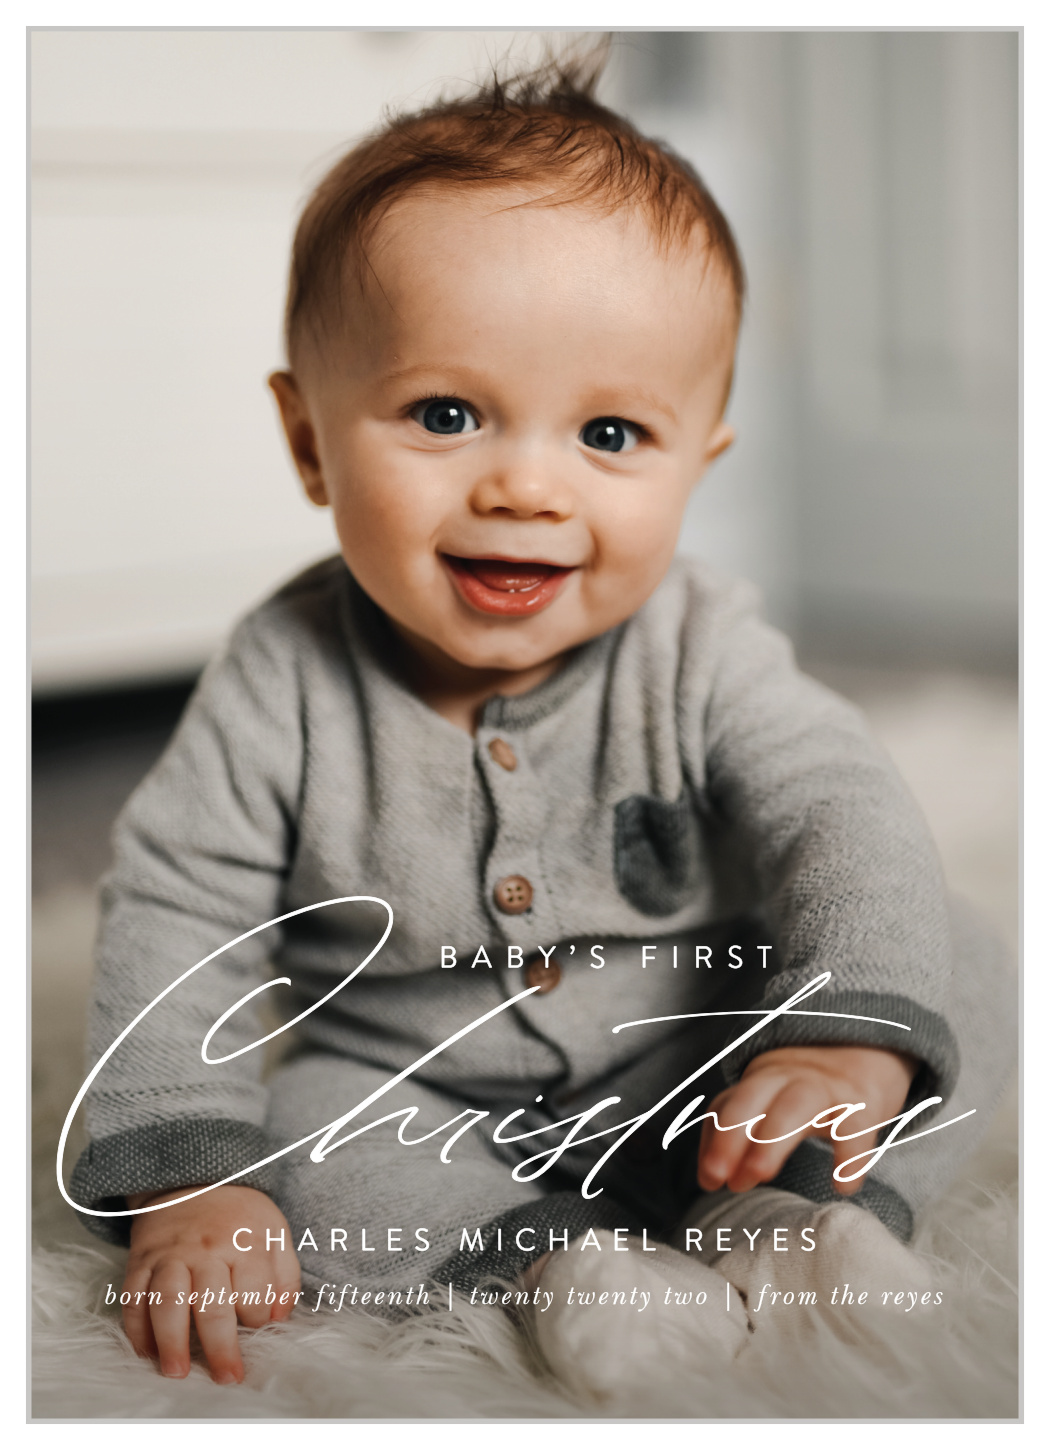 Baby's First Christmas Cards